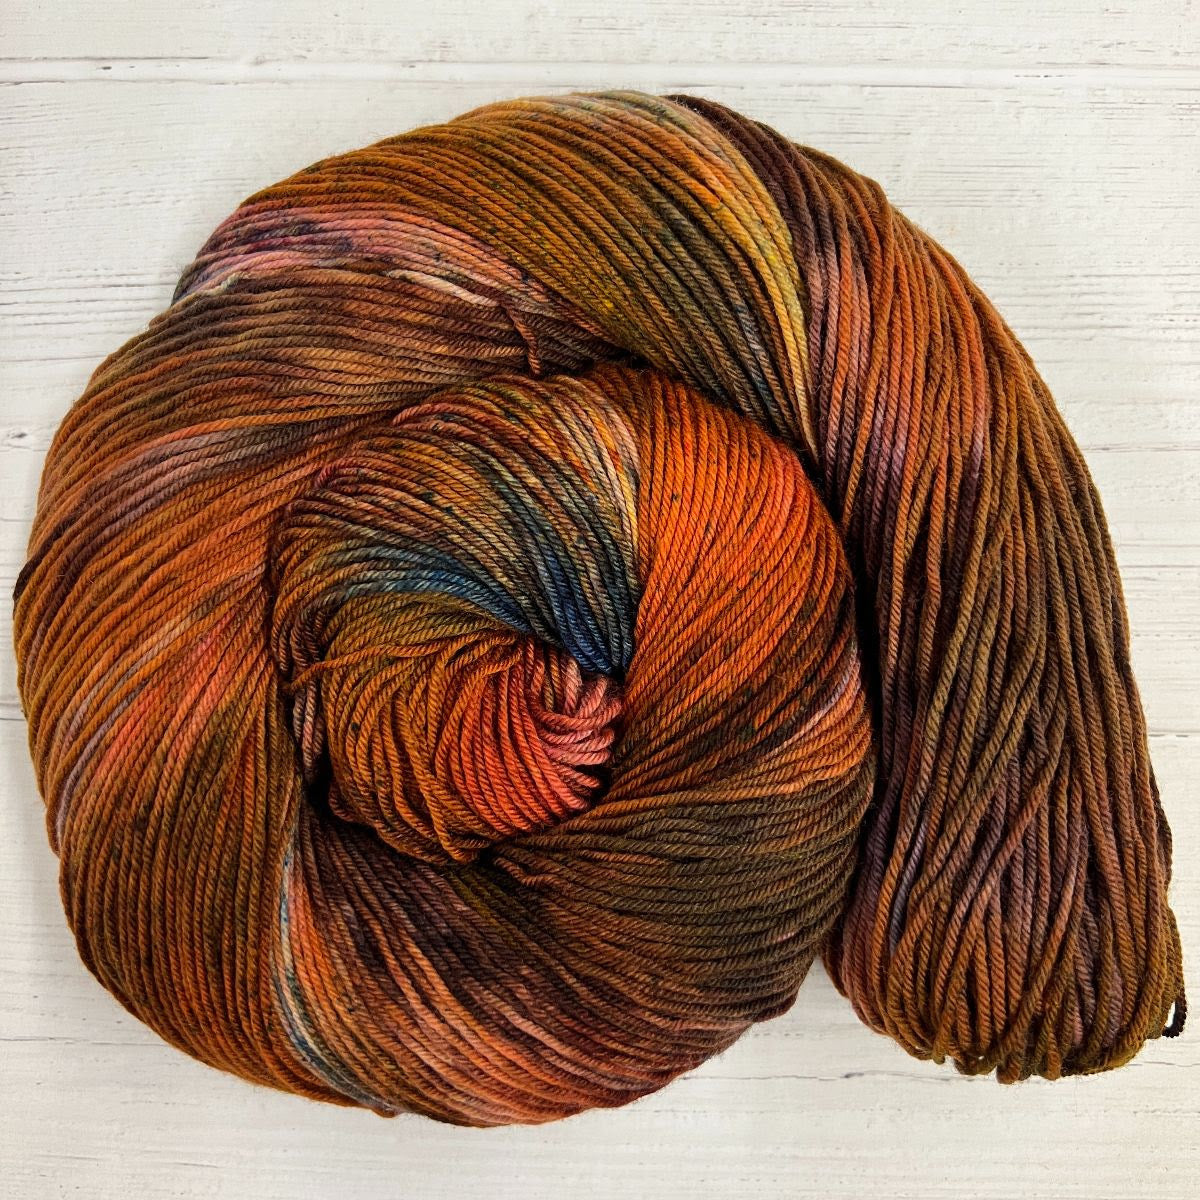 Knitted Wit Herstory October 2022- Roots of Resistance, an autumnal yarn swirled into spiral